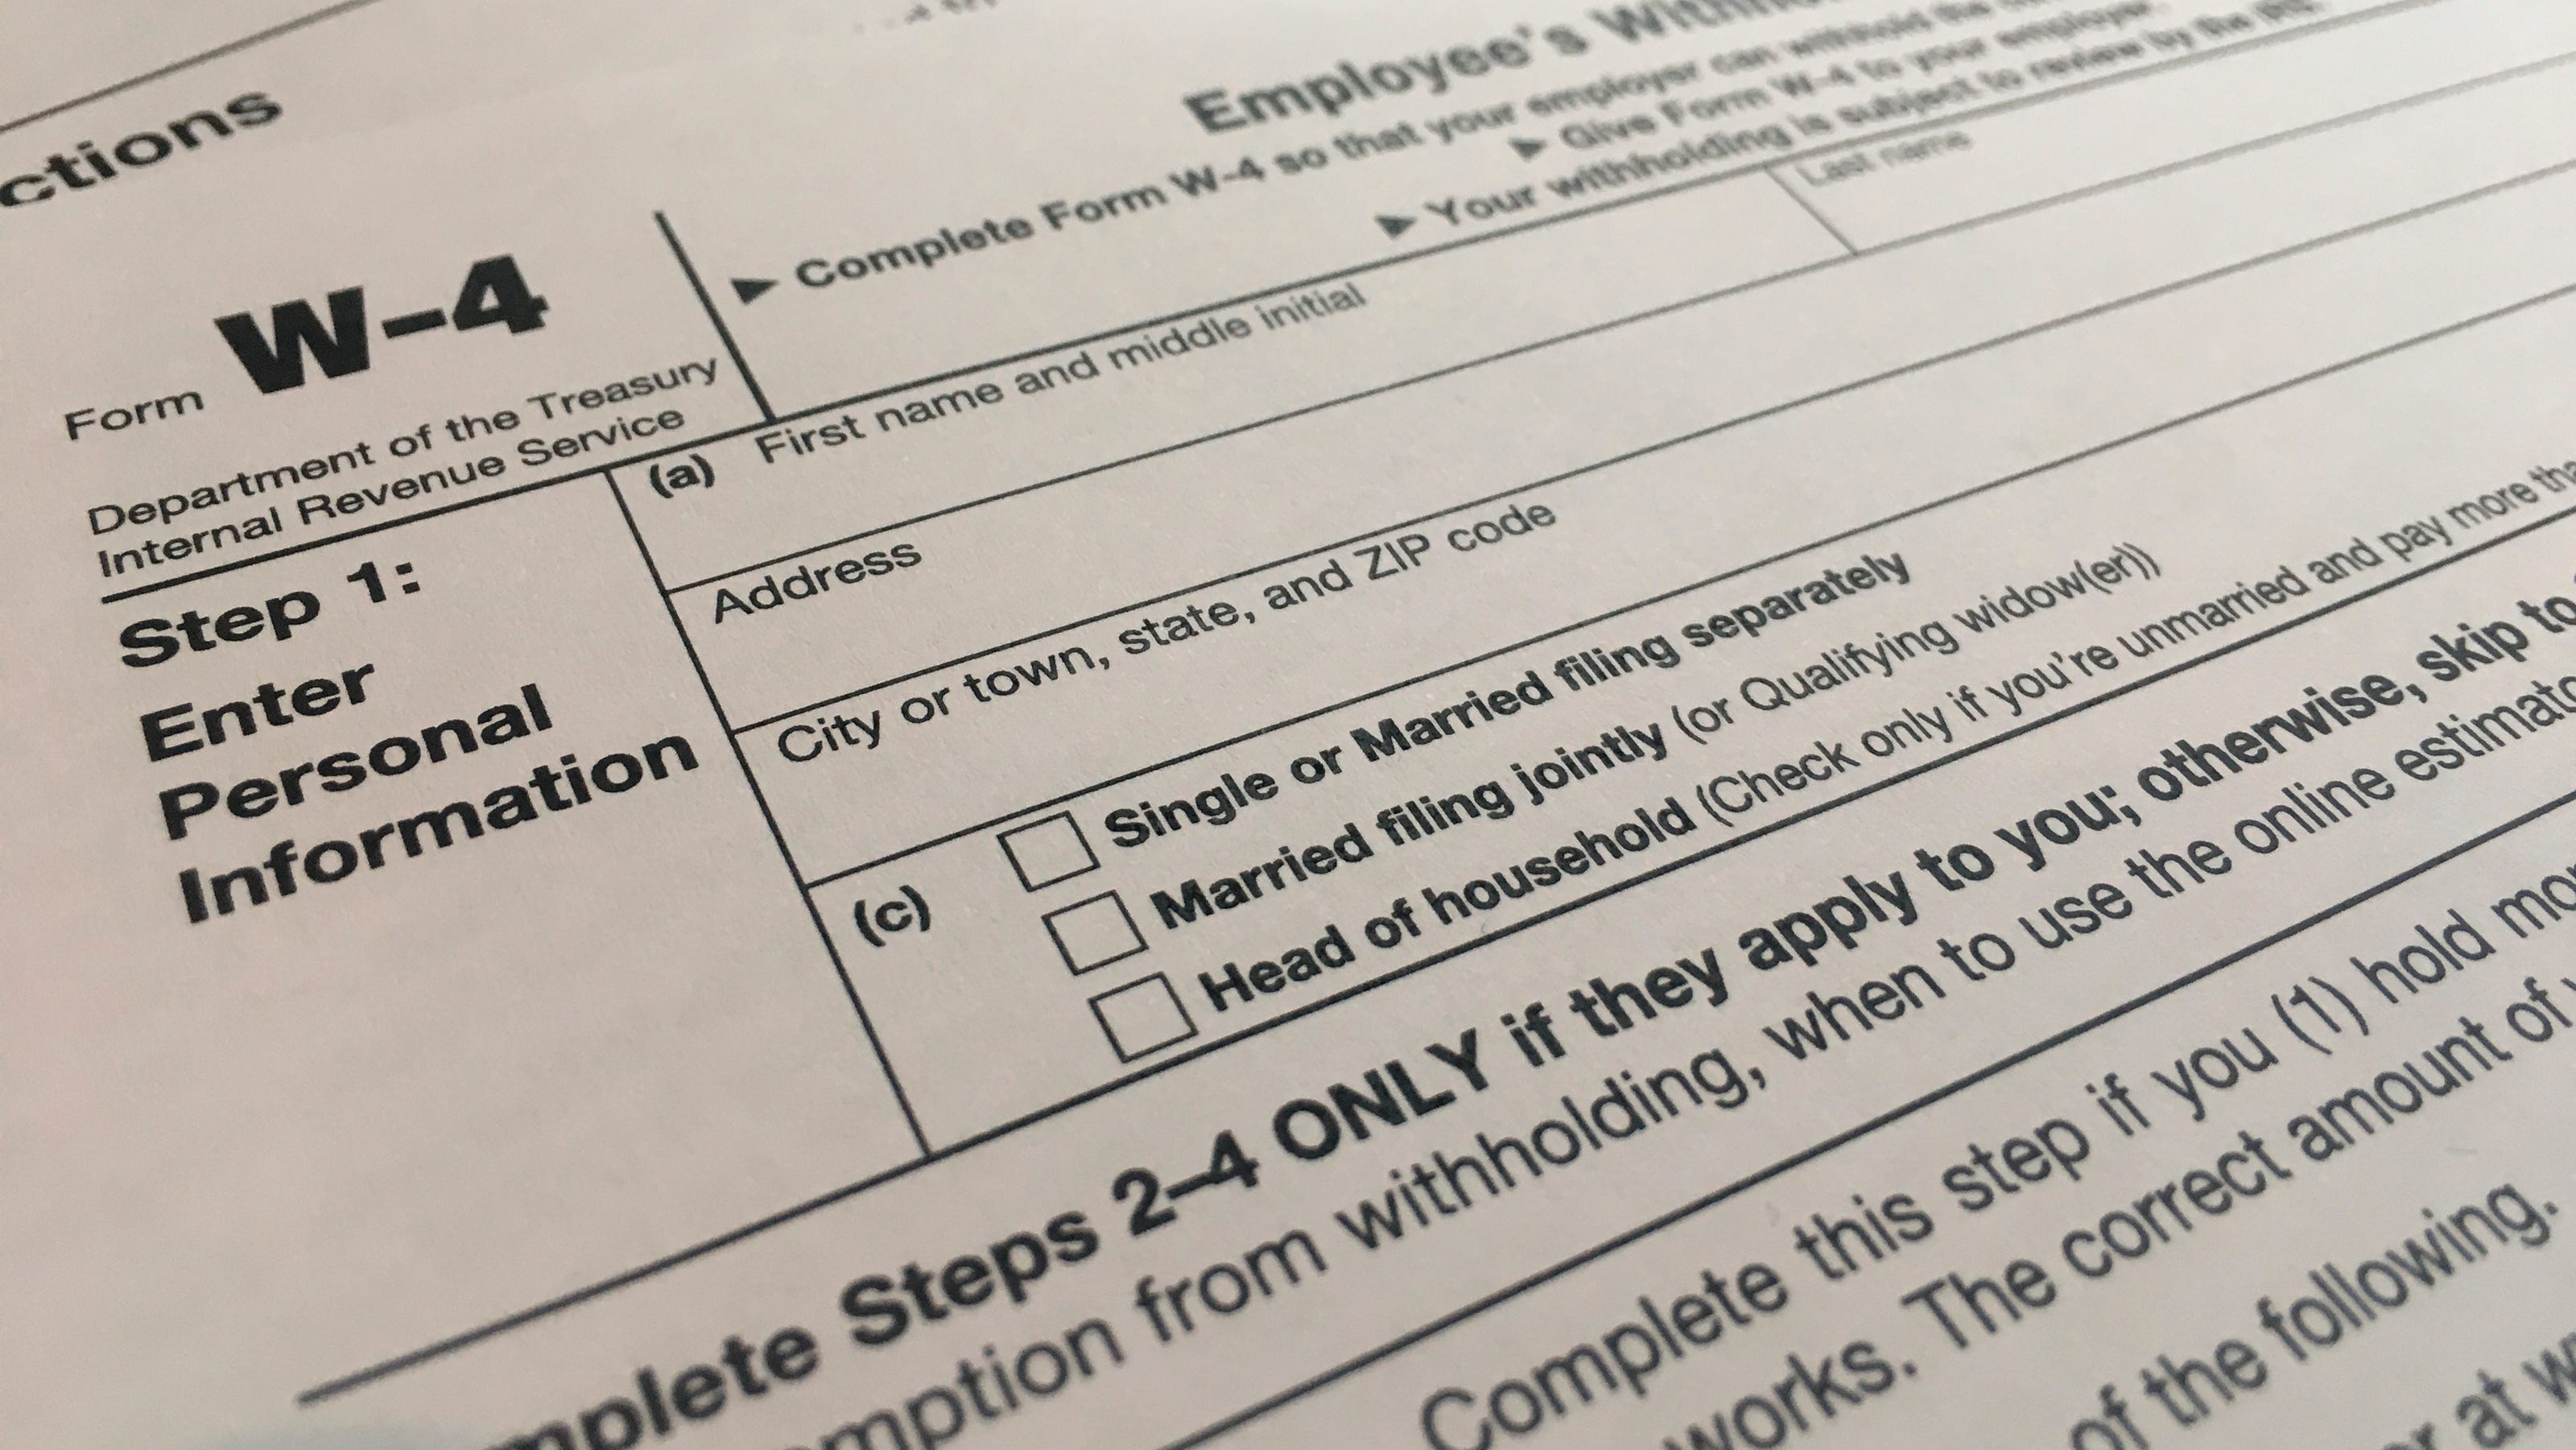 free-printable-state-tax-forms-printable-forms-free-online